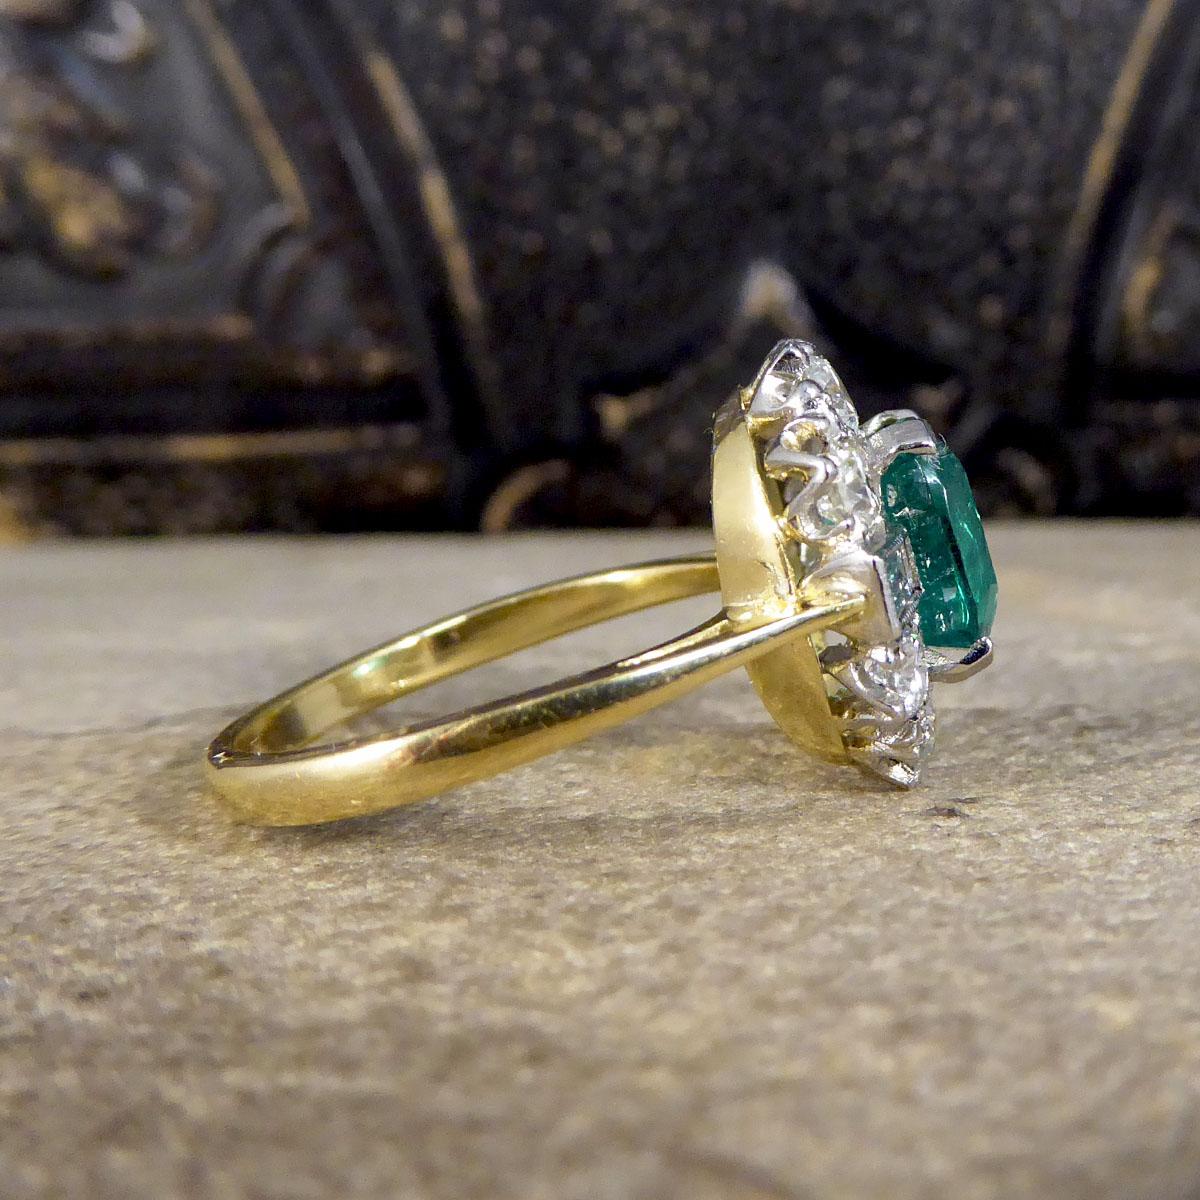 Edwardian Contemporary 2.08ct Emerald and 1.25ct Diamond Cluster Ring in 18ct Gold